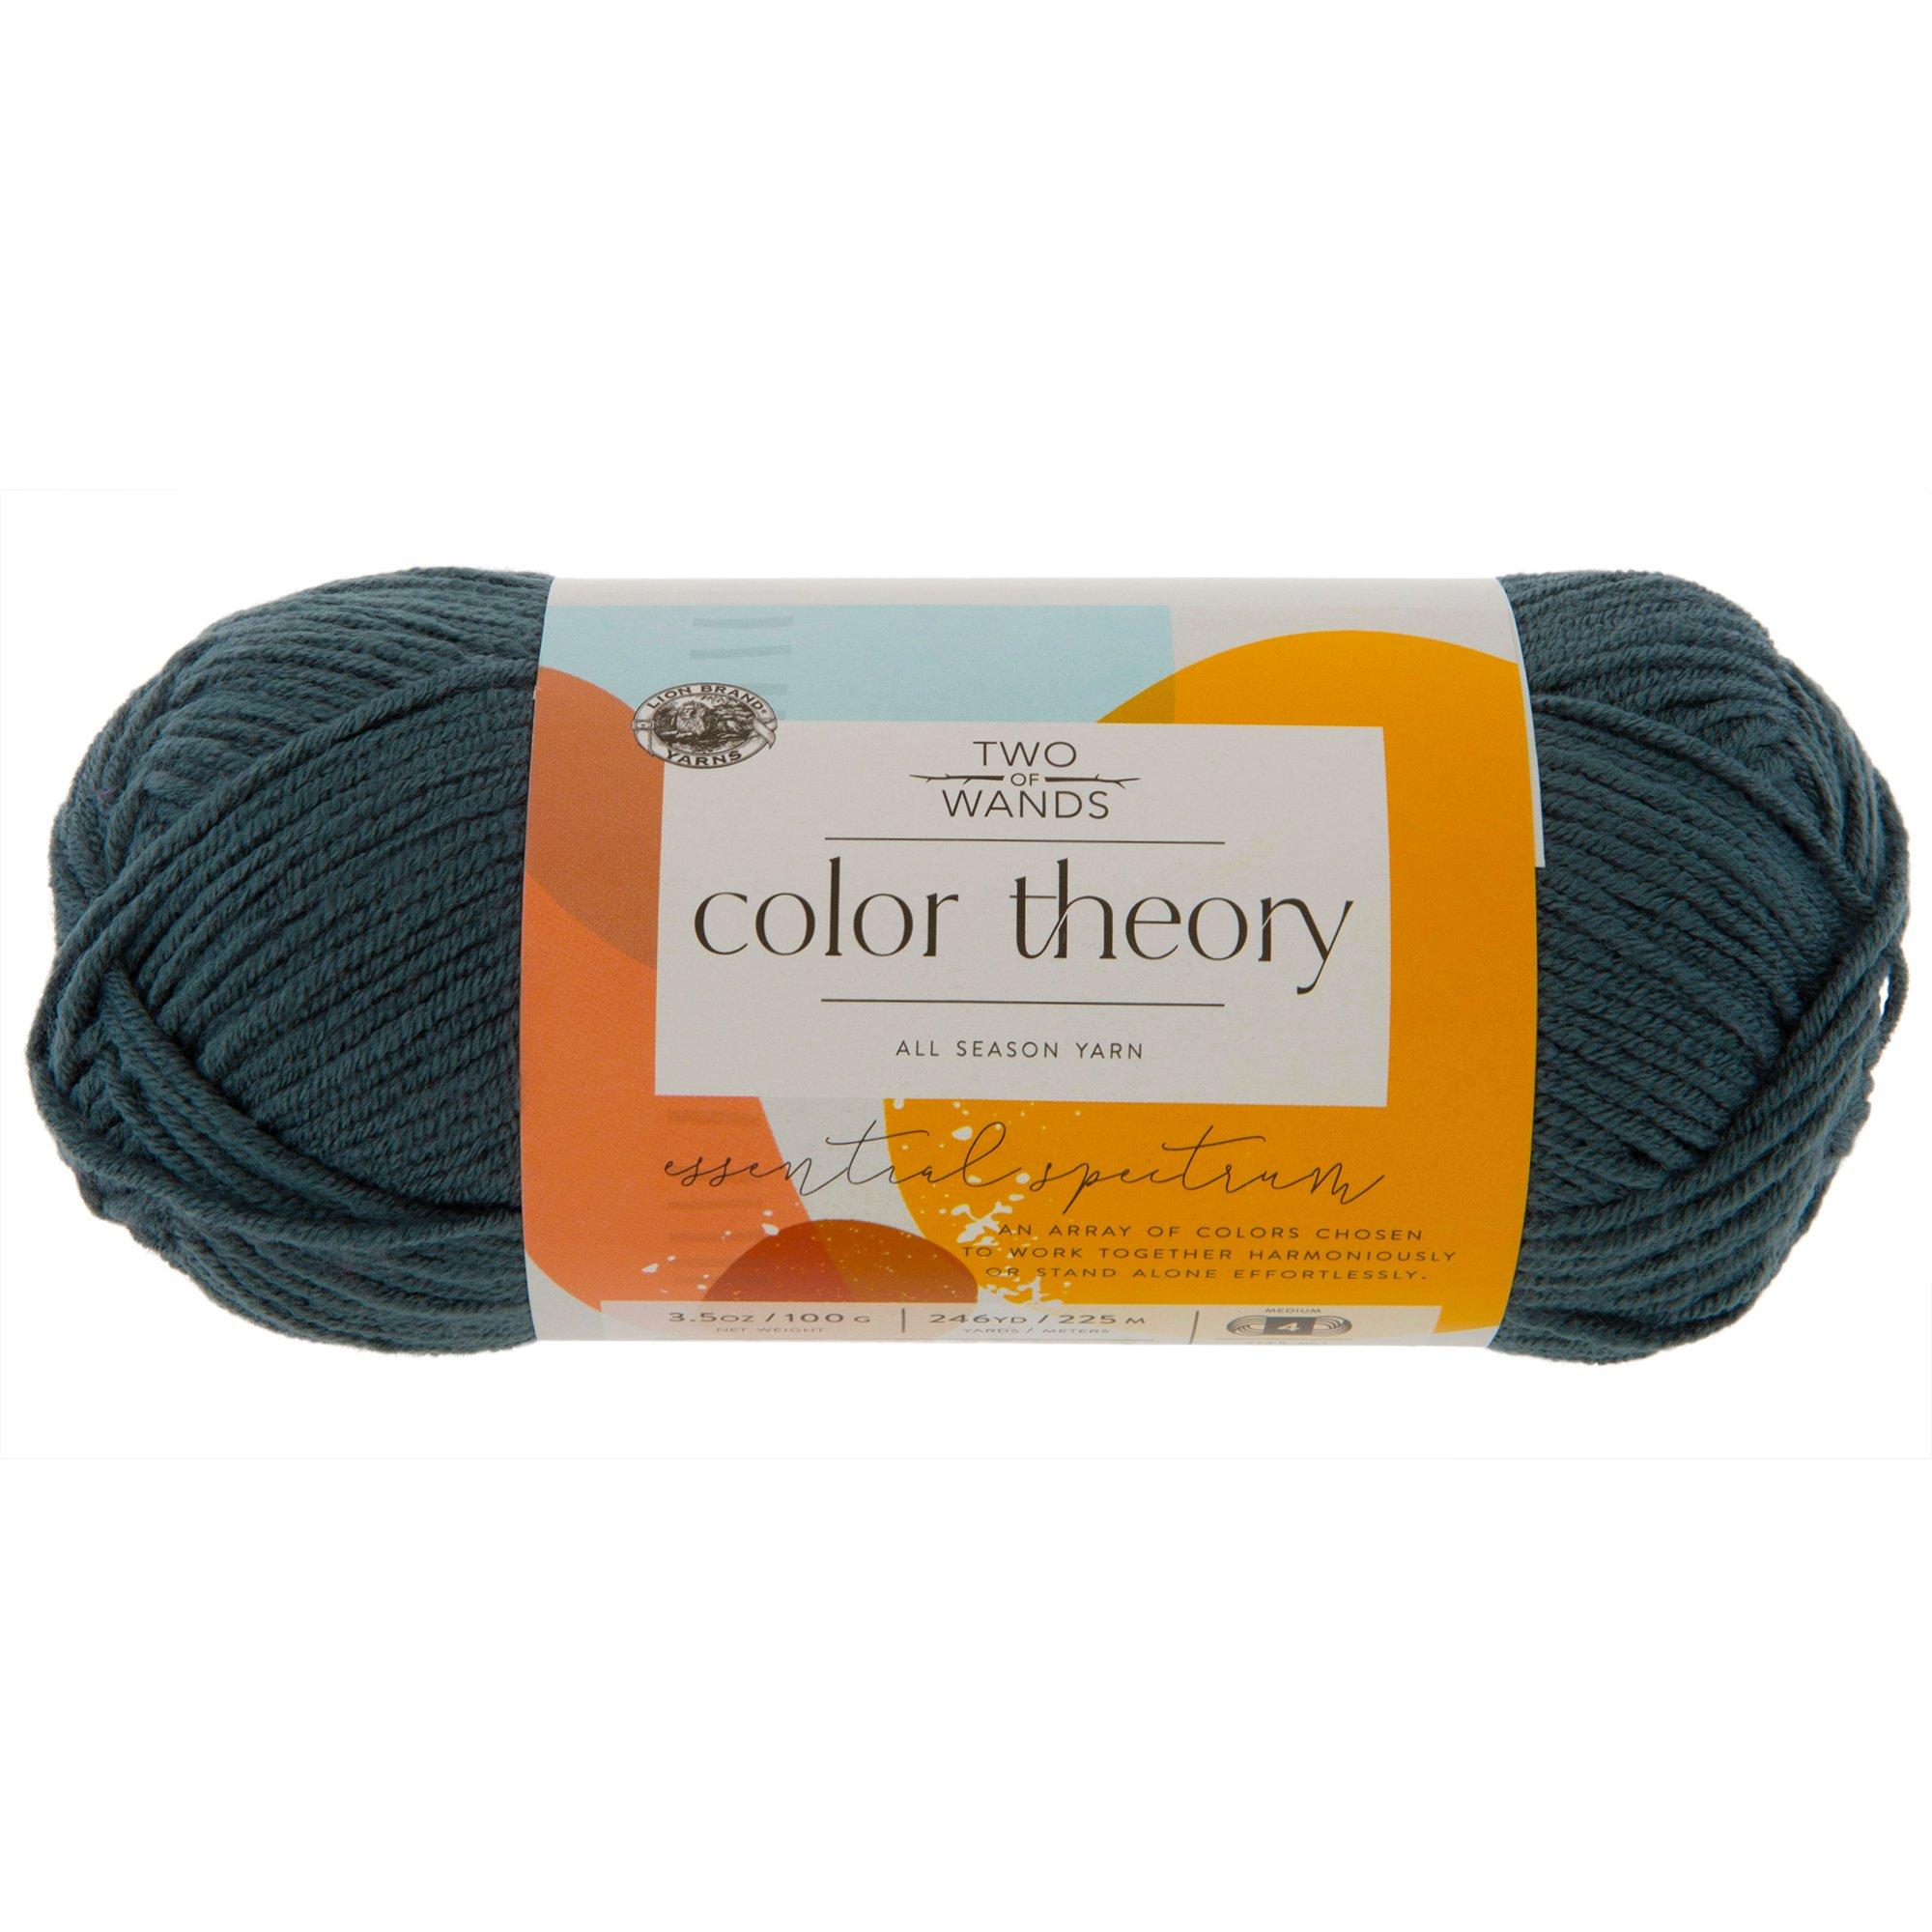 Buy The Golden Theory Ochron color multipurpose self adhesive